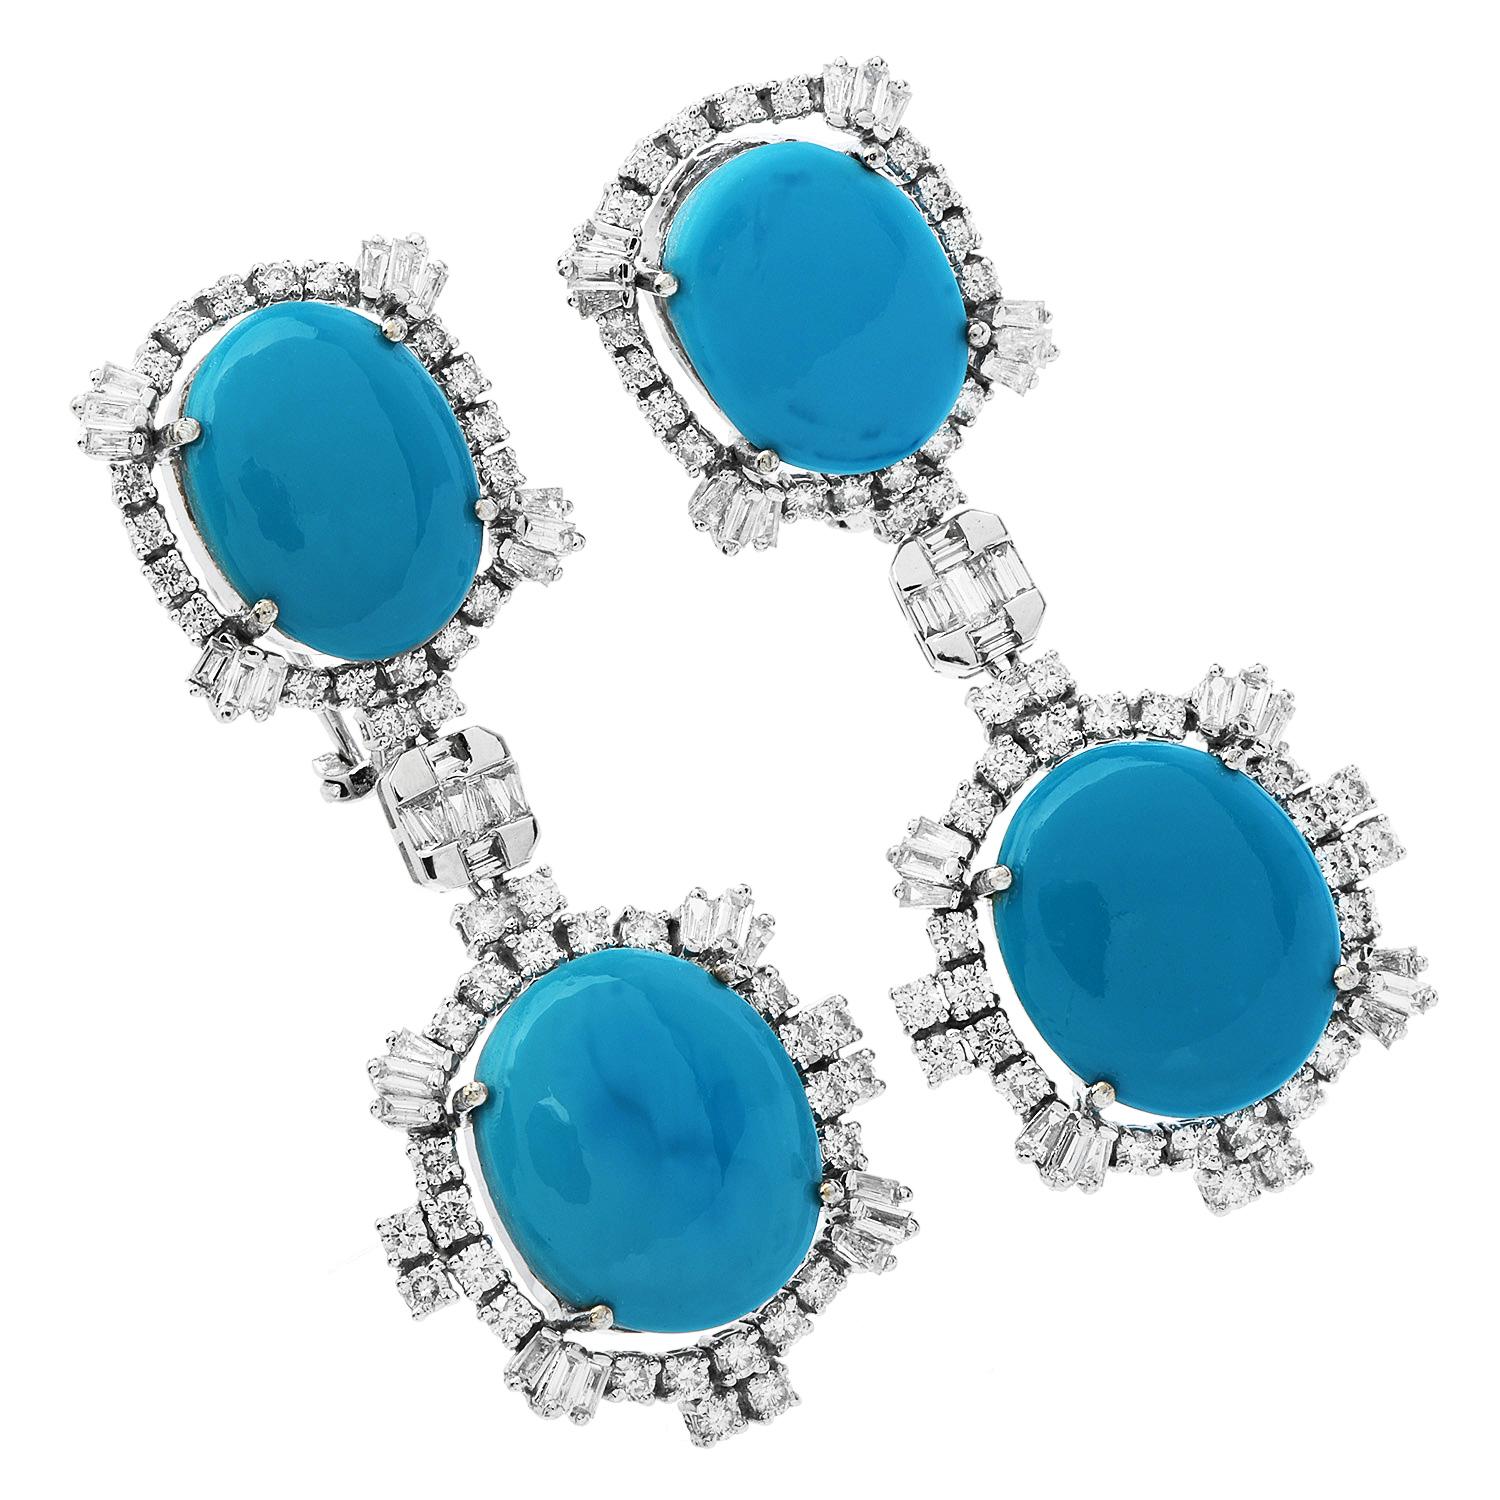 Be the belle of the ball, and show your elegance by complimenting your best Gala Dress with these extraordinary Diamond and Turquoise Earrings. 

These earrings are crafted in 18k white gold.  They are centered by 4 genuine turquoise gemstones, two